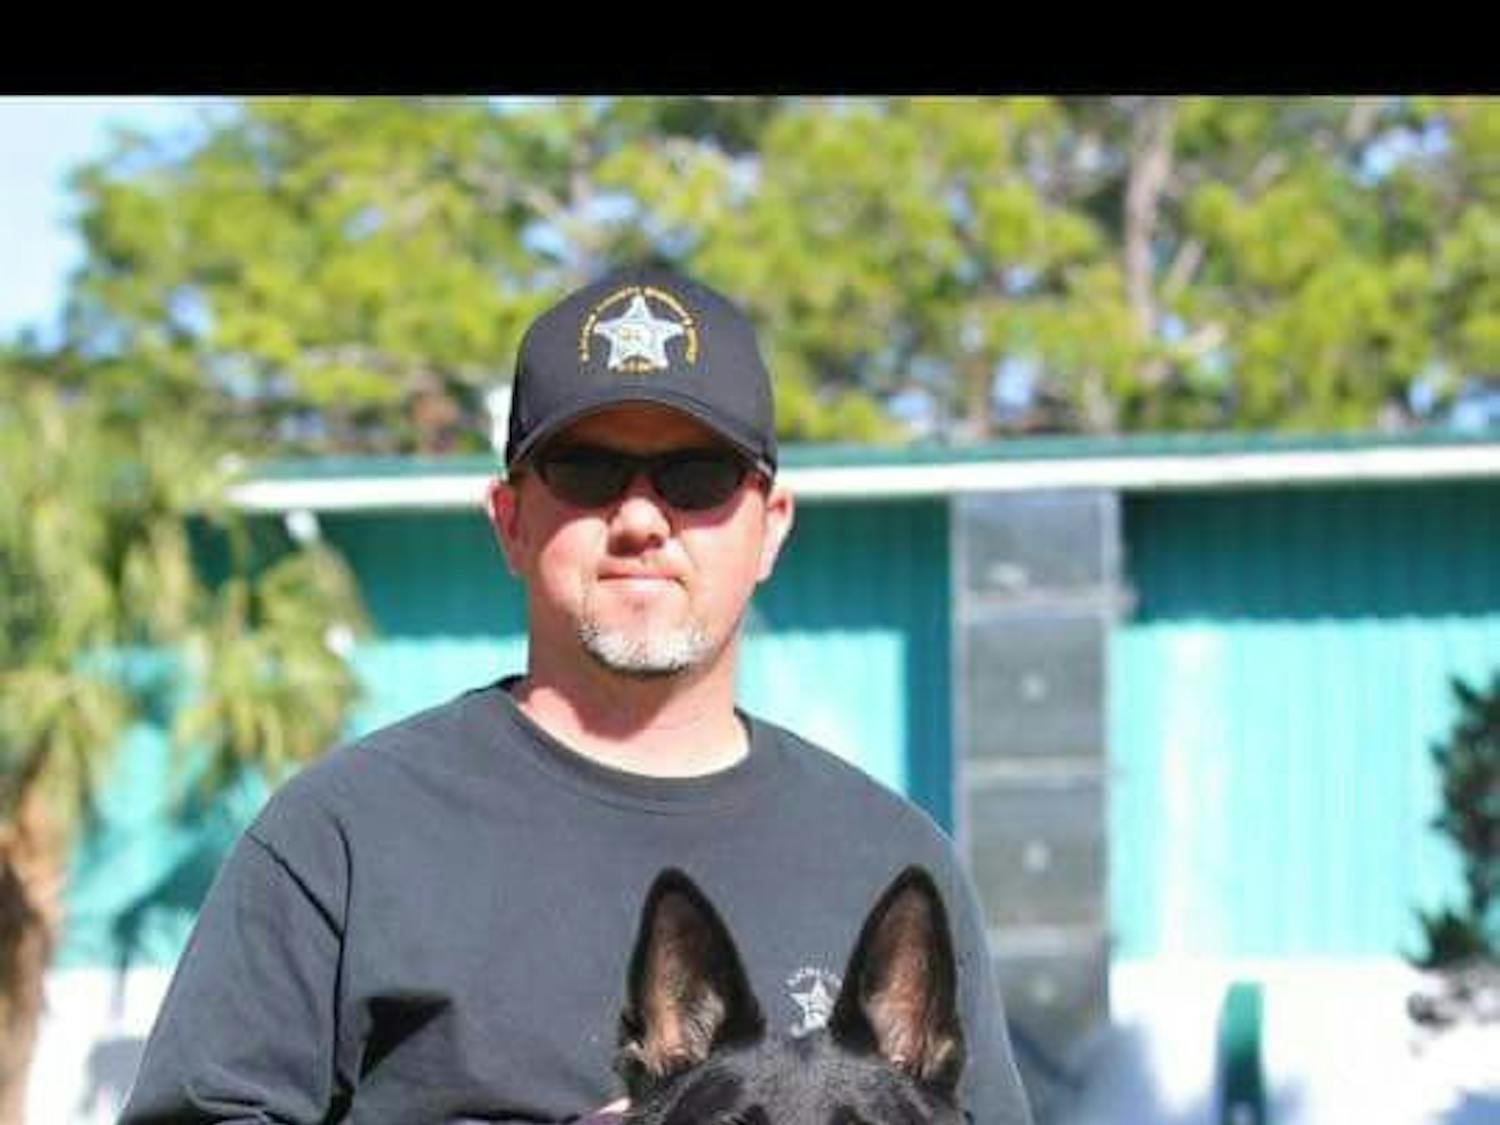 ACSO Deputy Clint Ferguson pictured in Jauary 2016 with his former police dog Vader.